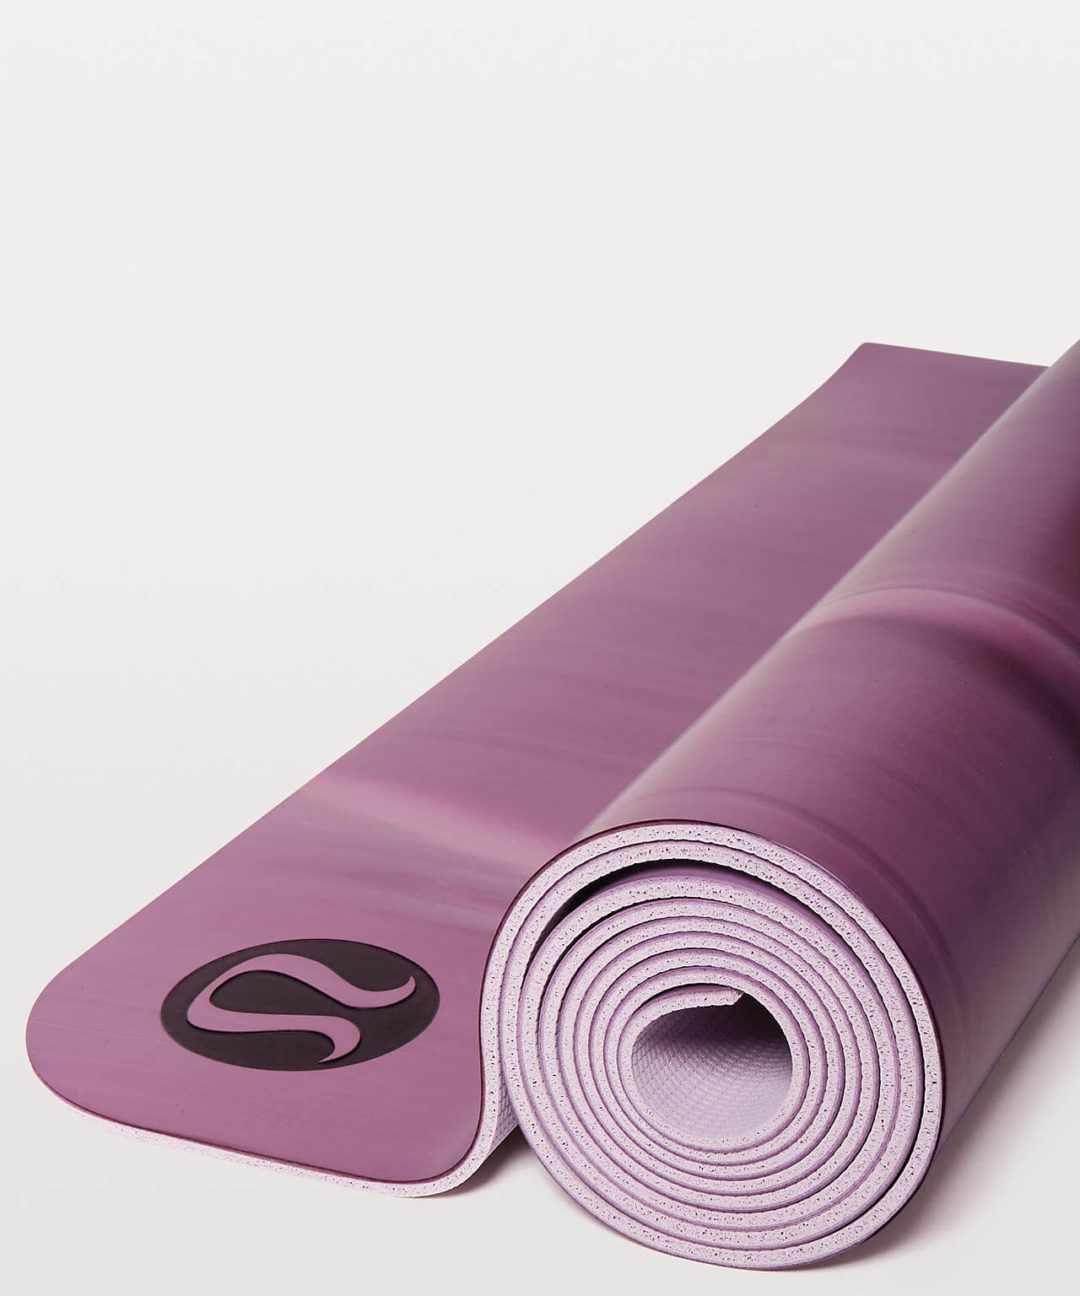 I've been using this Lululemon yoga mat for years: My review